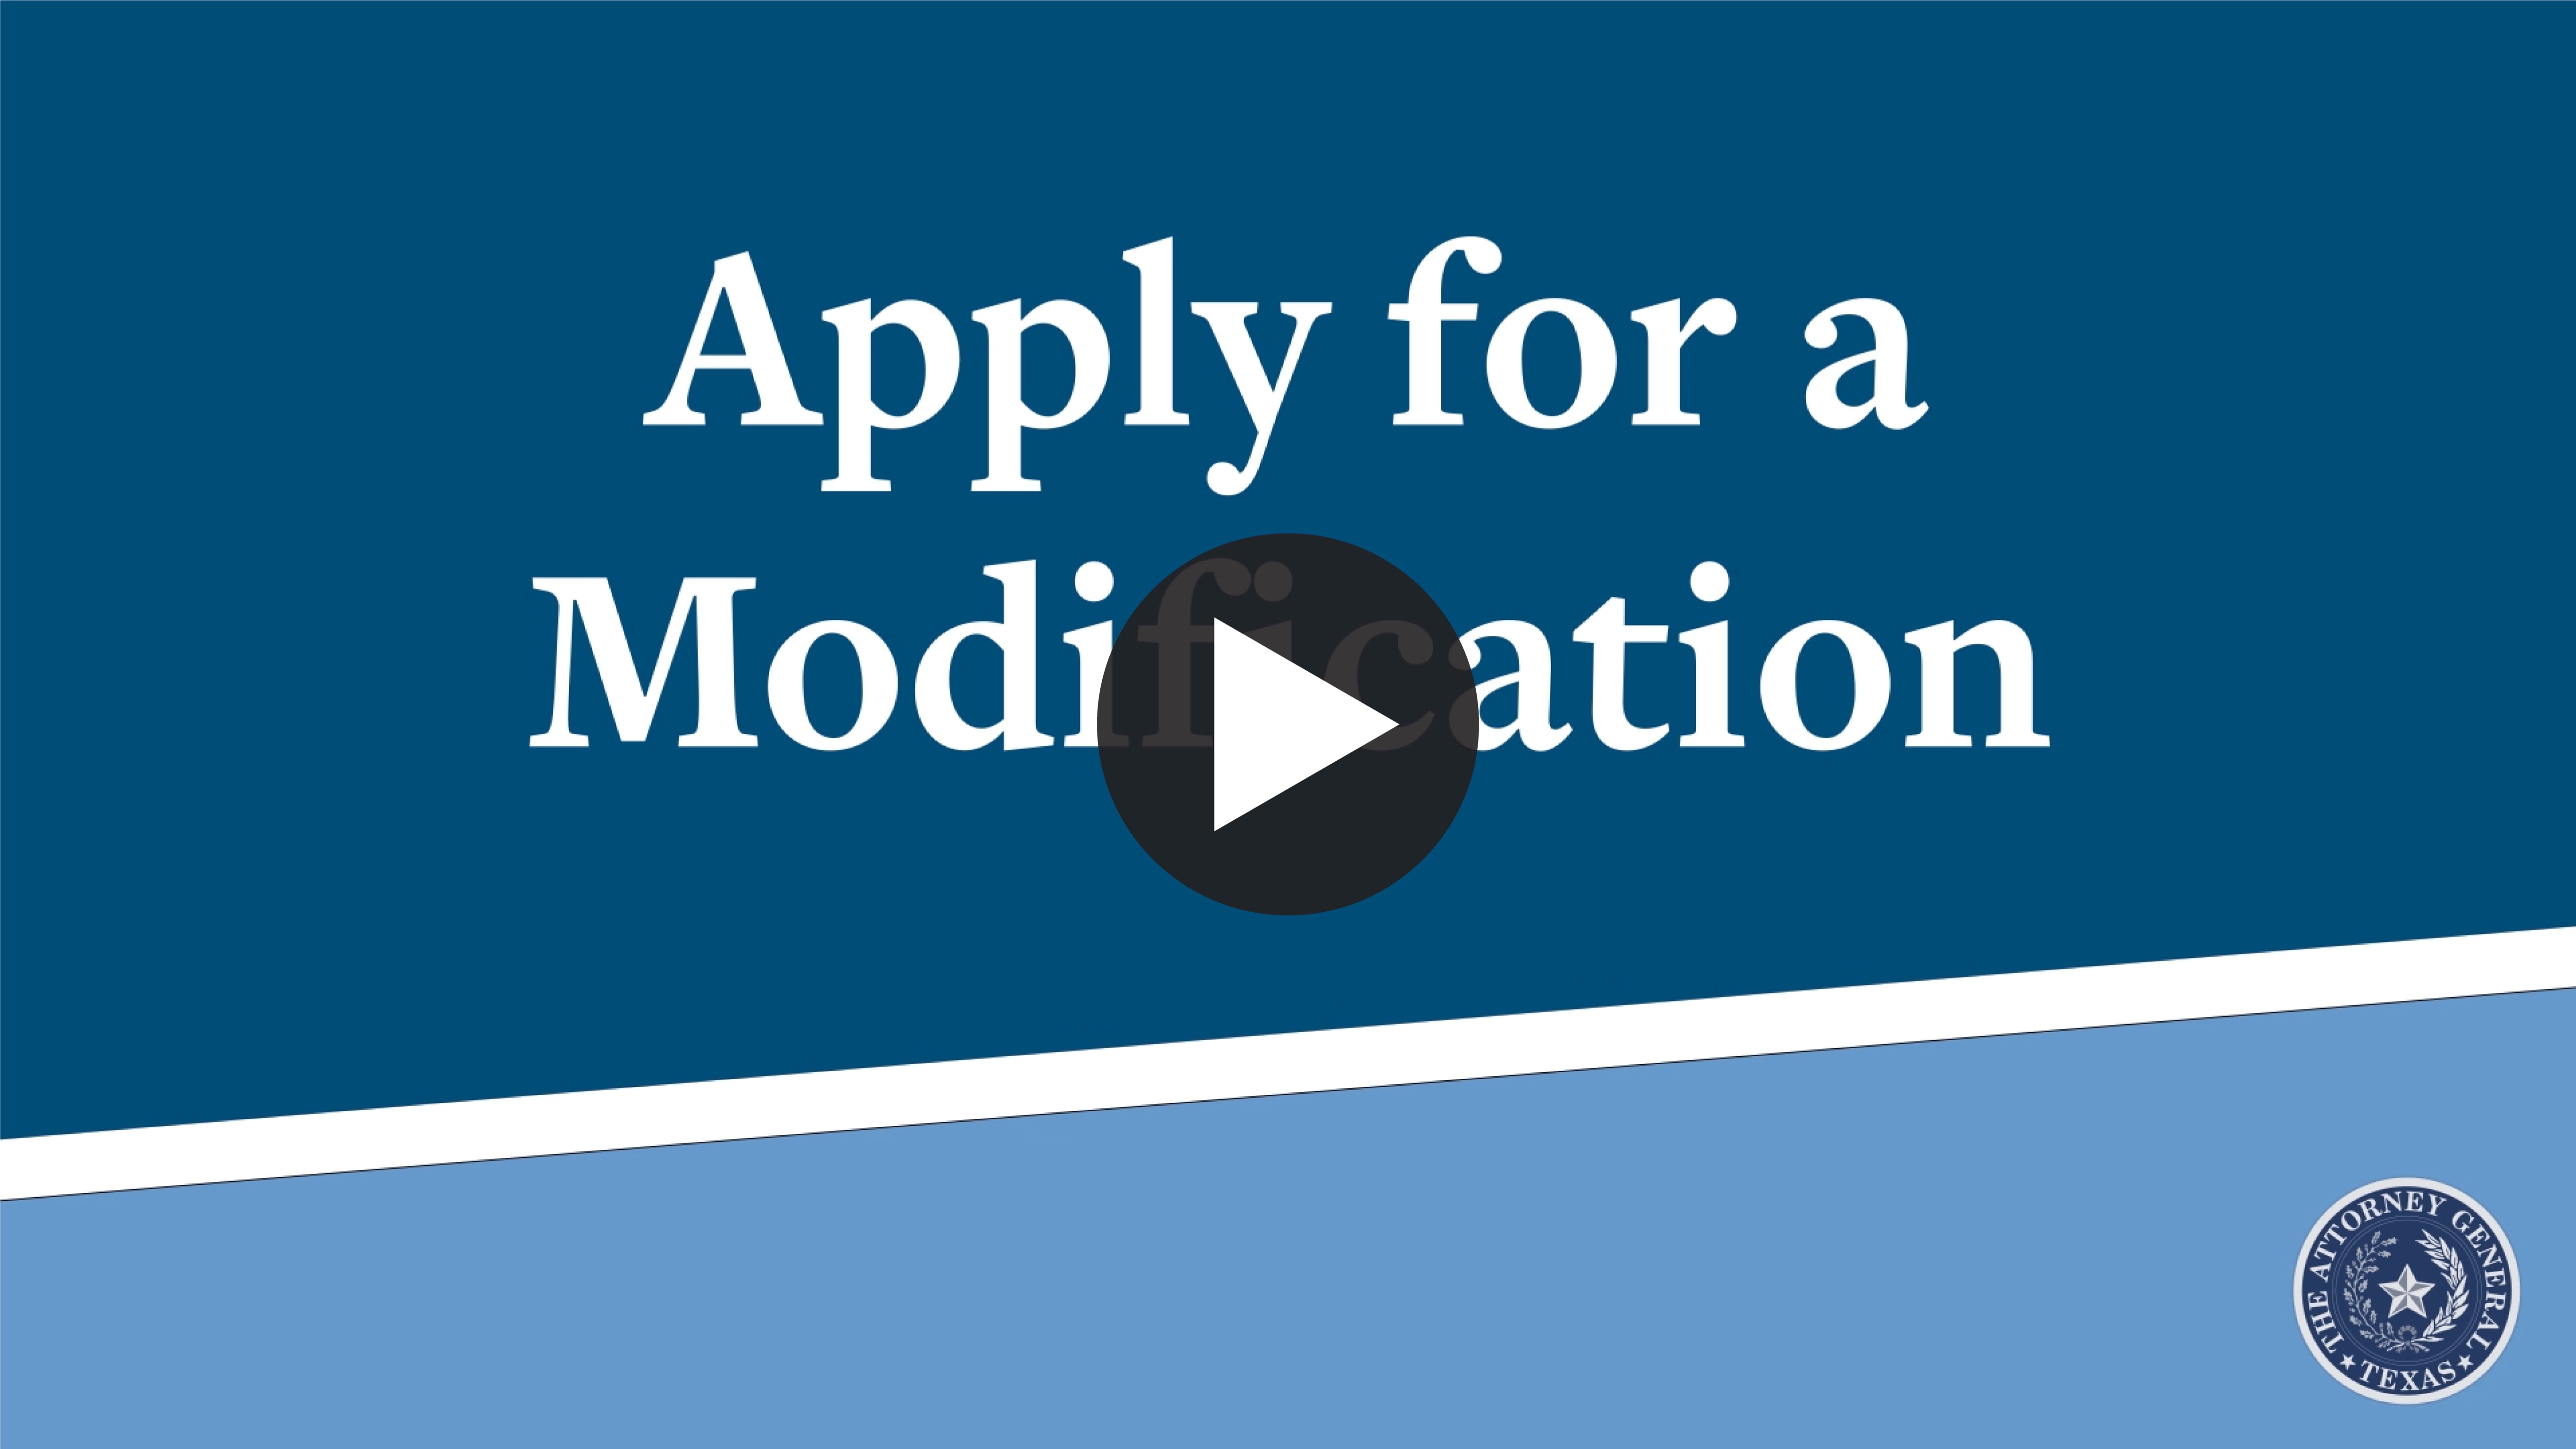 Apply for a modification